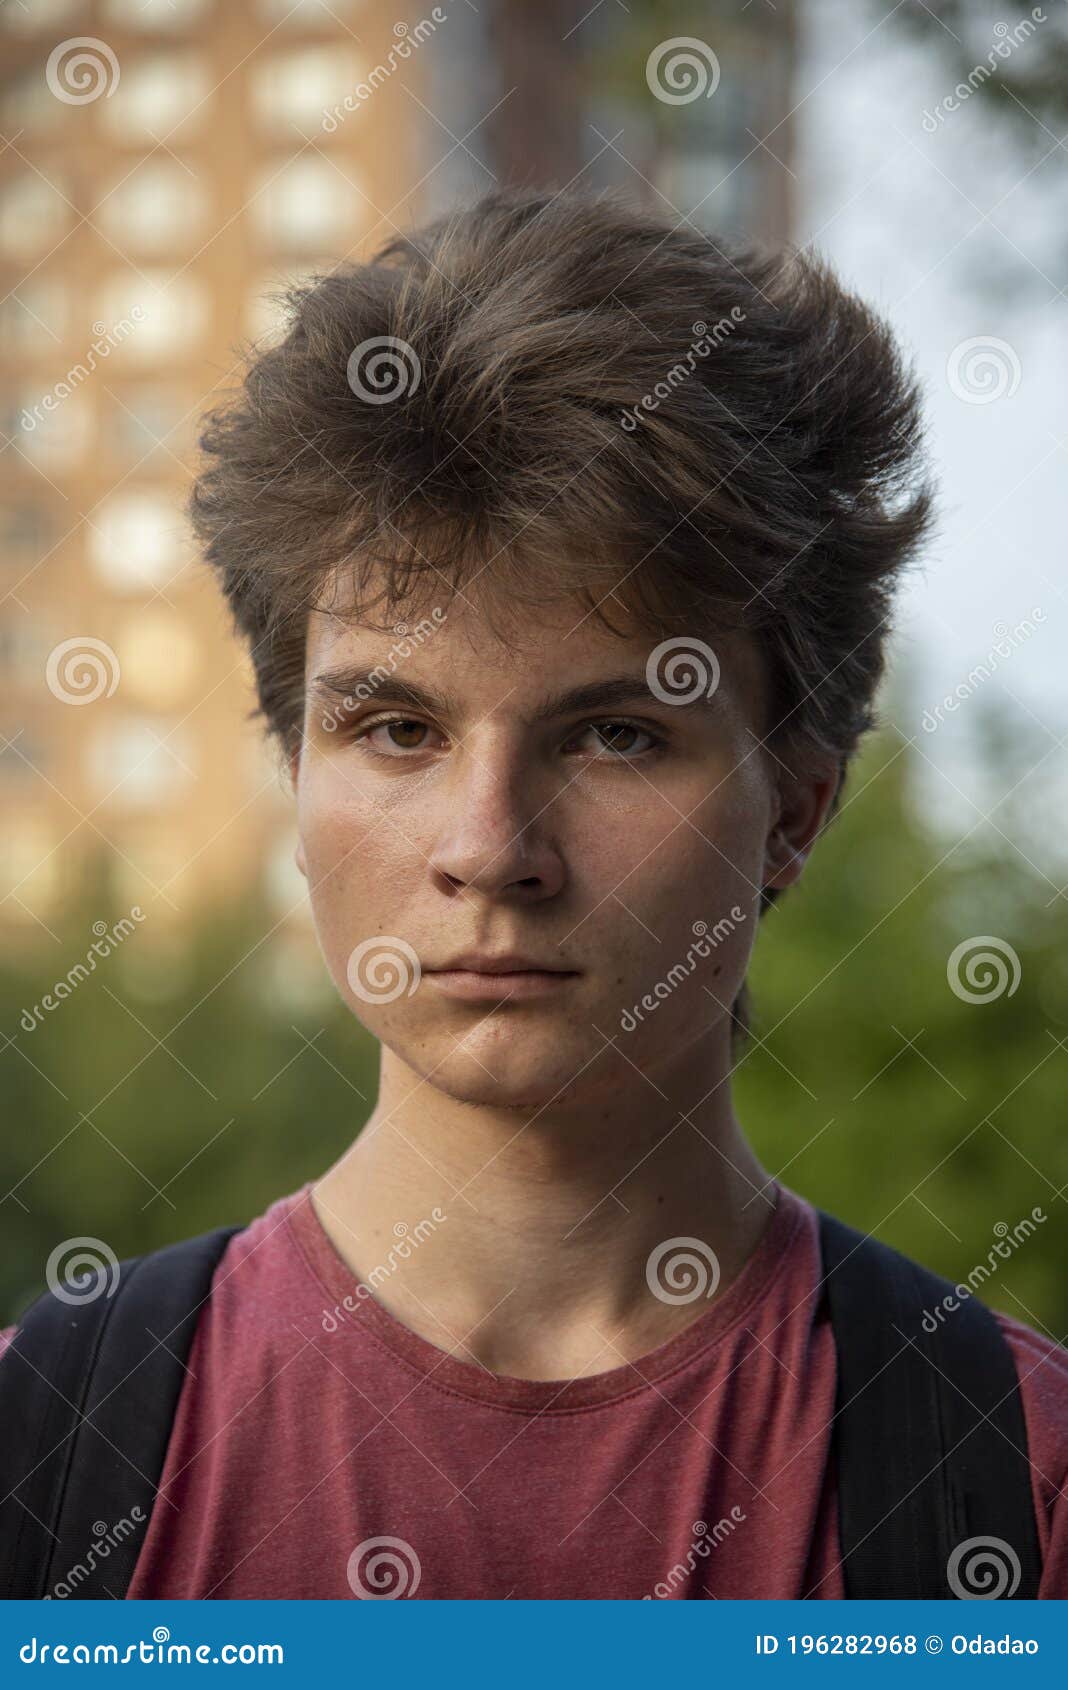 Portrait of a Young Teenager 17 Years Old in a Red T-shirt with Thick Hair  Stock Photo - Image of acne, future: 196282968